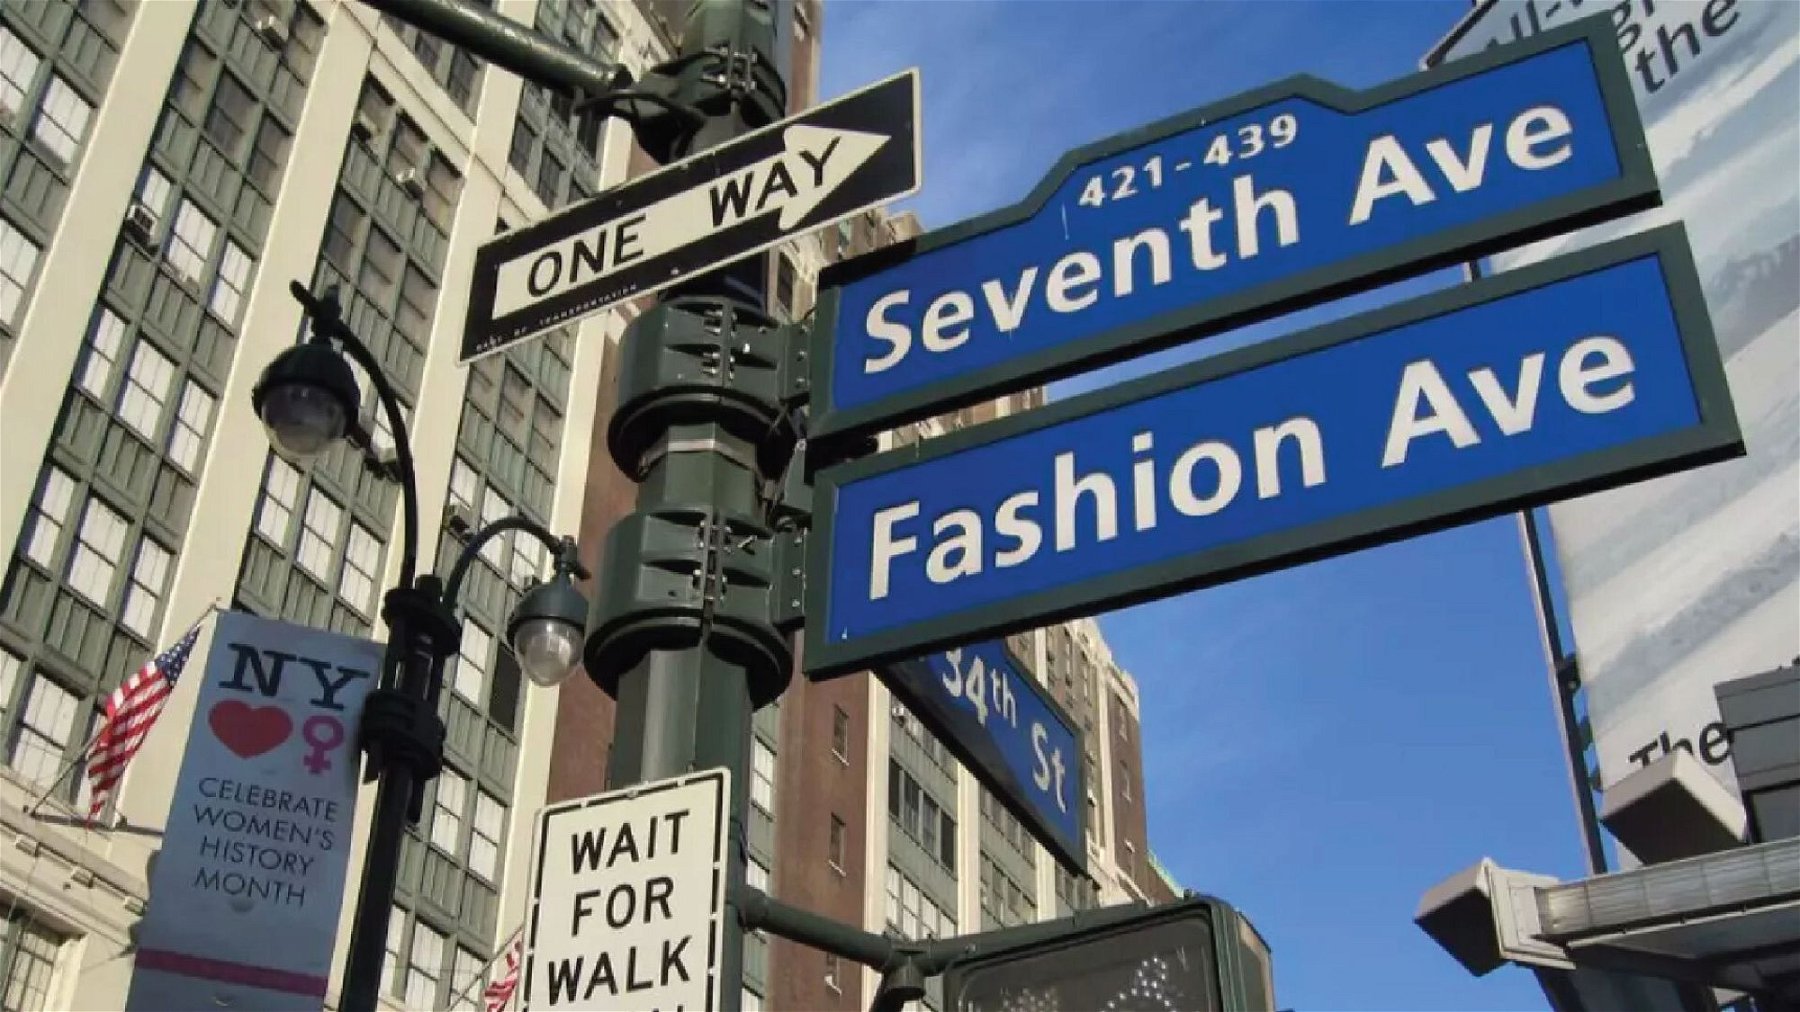 NYC: From 7th Avenue to Fashion Avenue